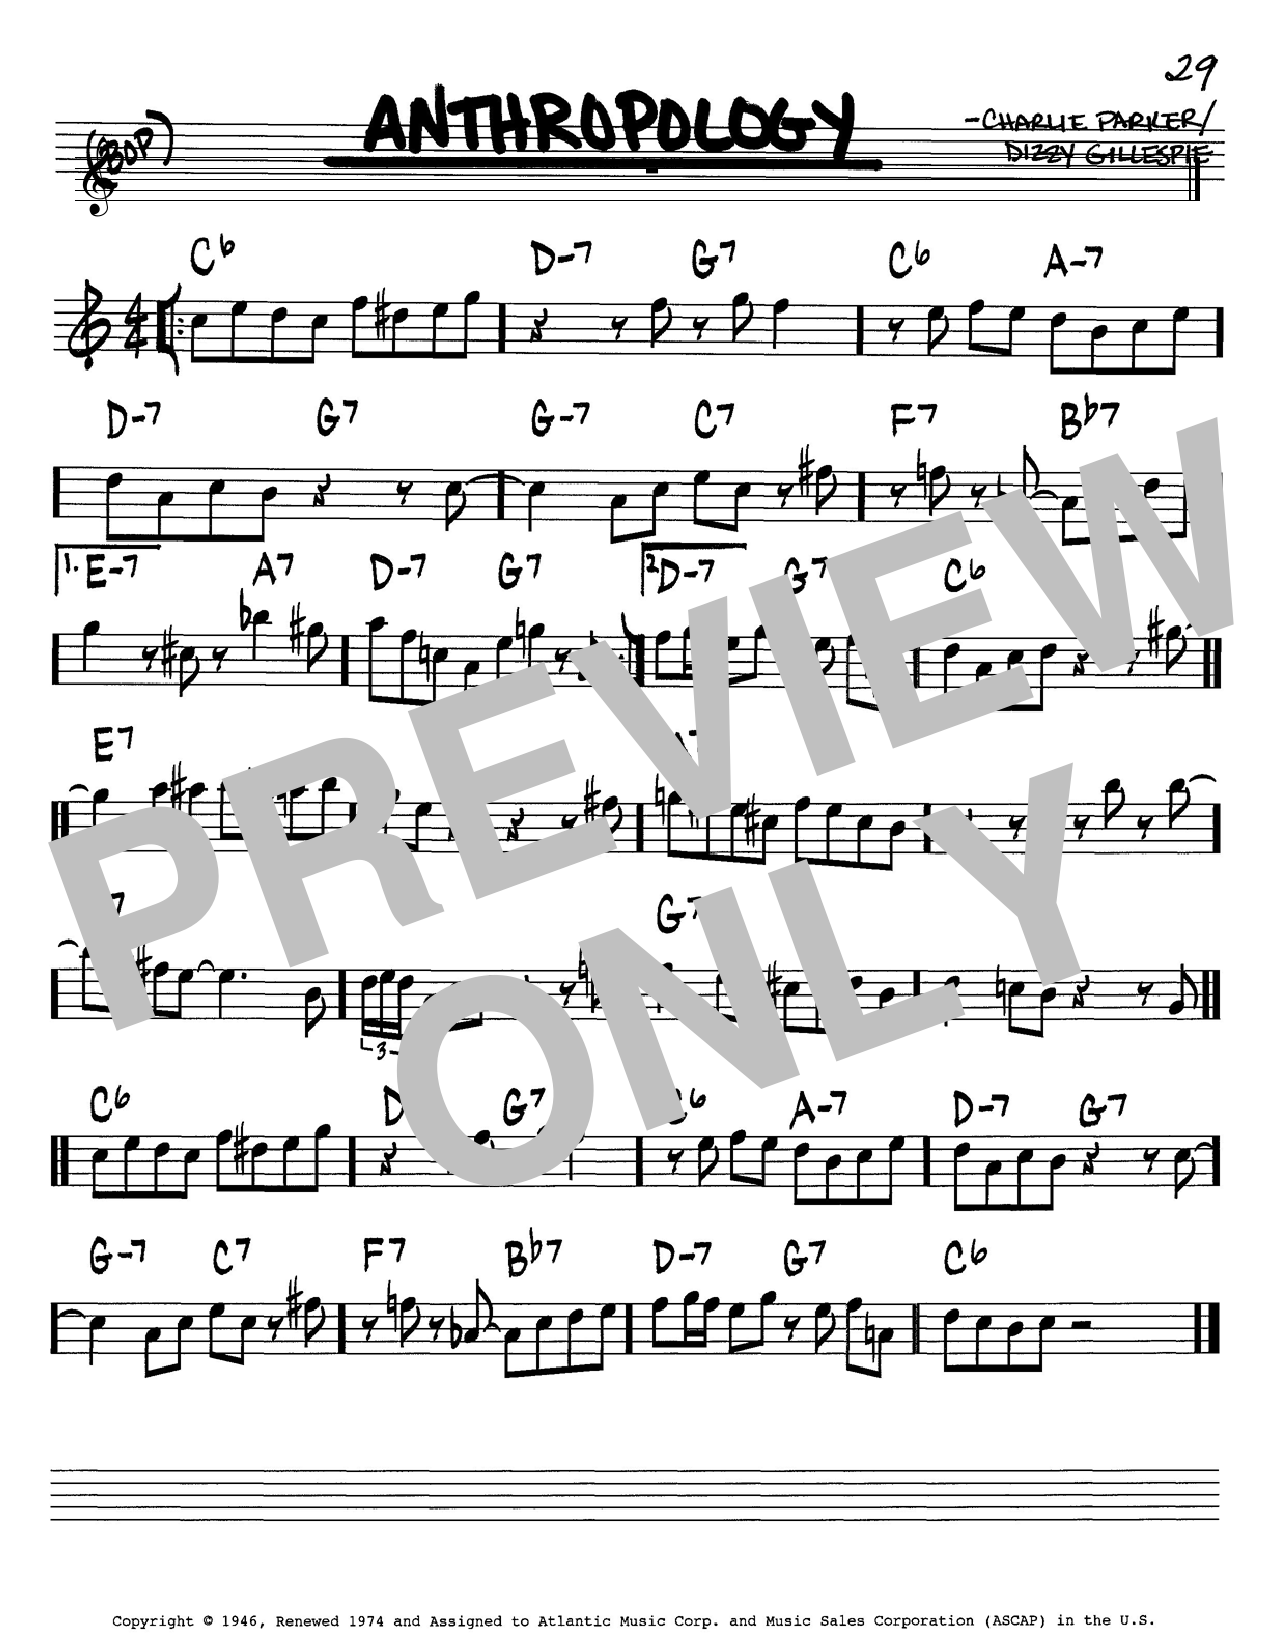 Charlie Parker Anthropology sheet music notes and chords. Download Printable PDF.